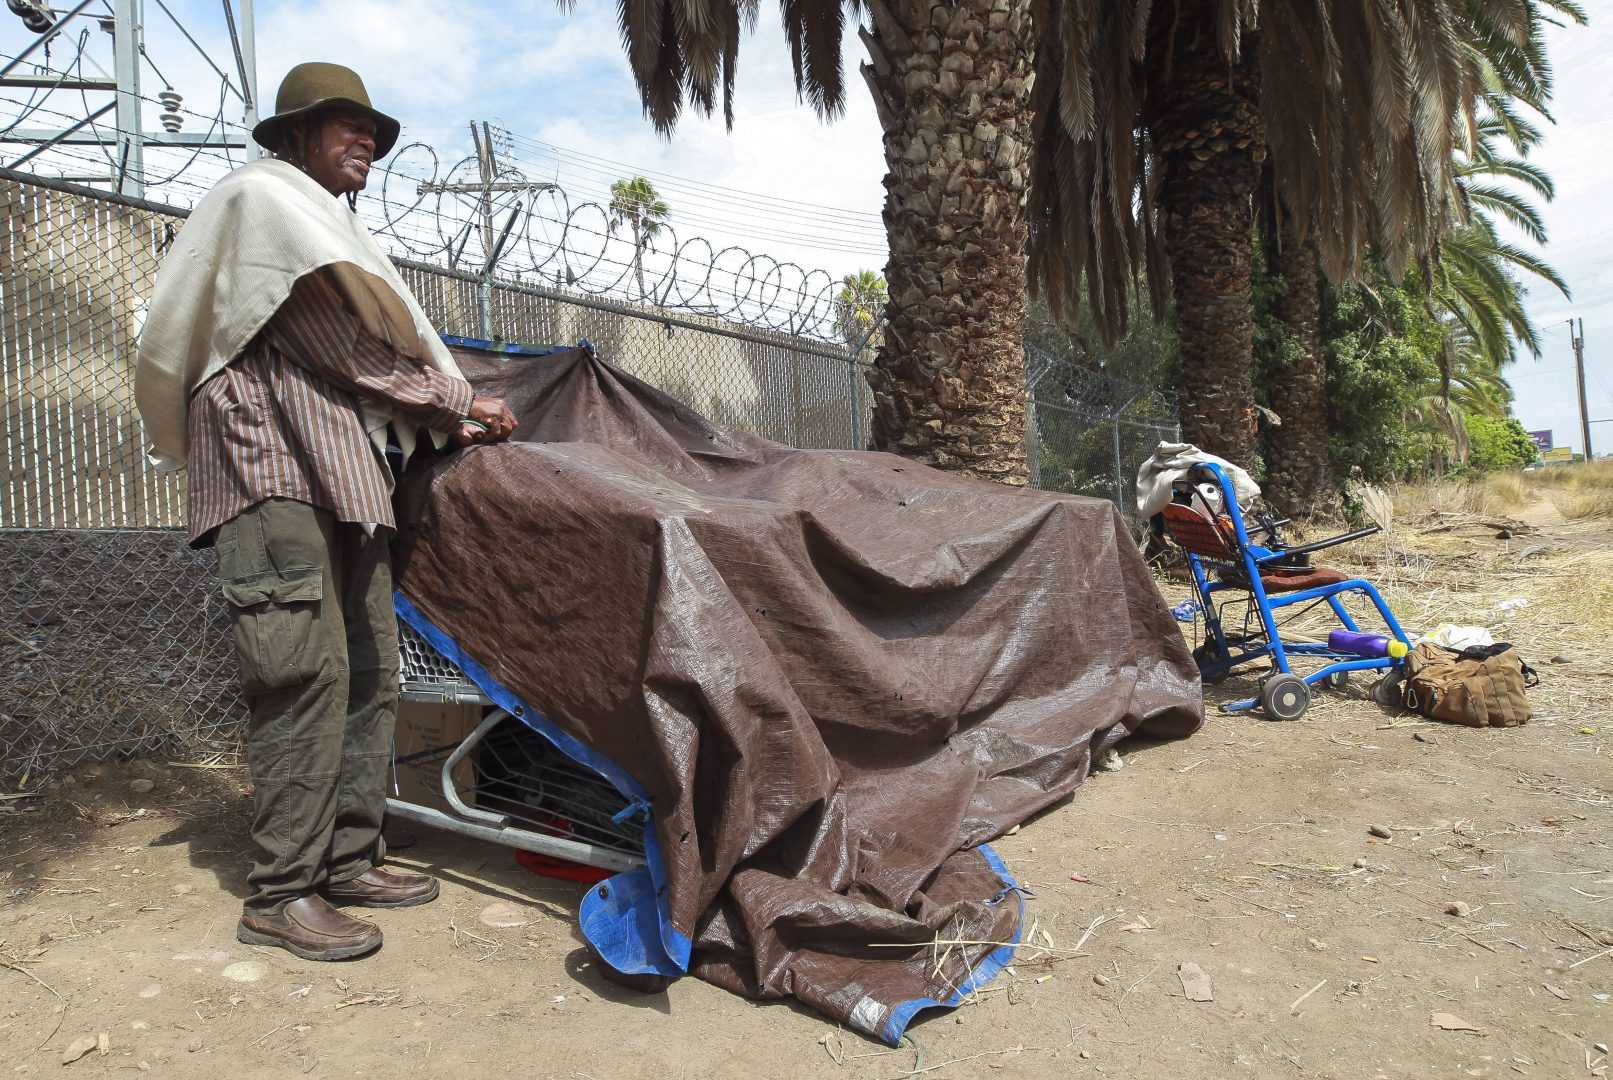 Charles Patterson, 69, who says hes been homeless for five years, ties down a tarp at his encampment that is nearby the proposed storage area site for homeless peoples belongings, located next to Chollas Parkway, on Wednesday, September 25, 2019 in San Diego, California. Patterson said he would use the storage site if he could be reassured that his belongings would be safe there.